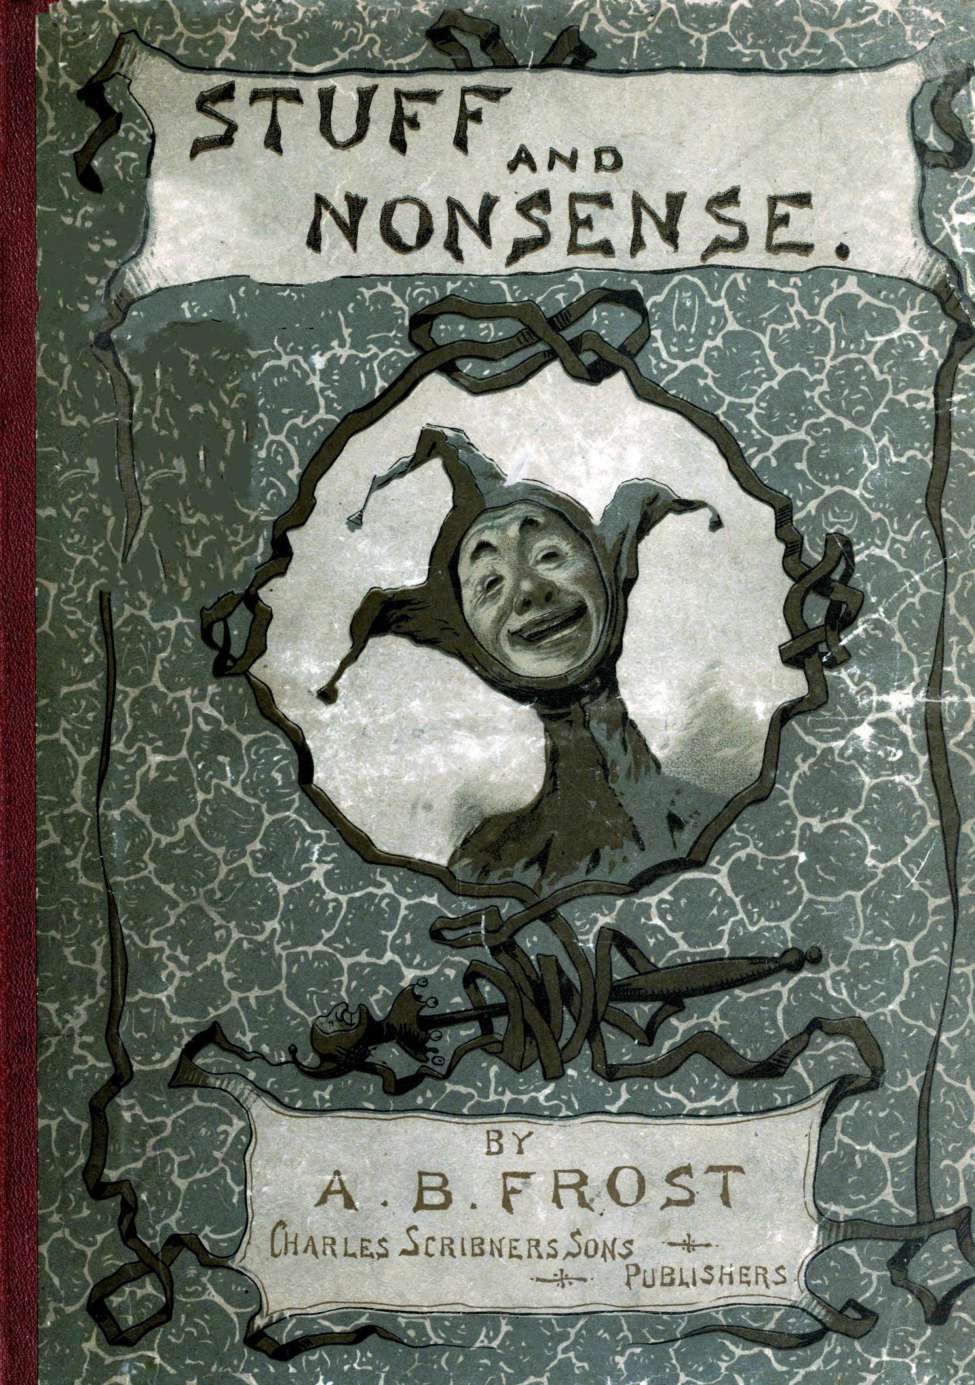 Book Cover For Stuff and Nonsense - A. B. Frost